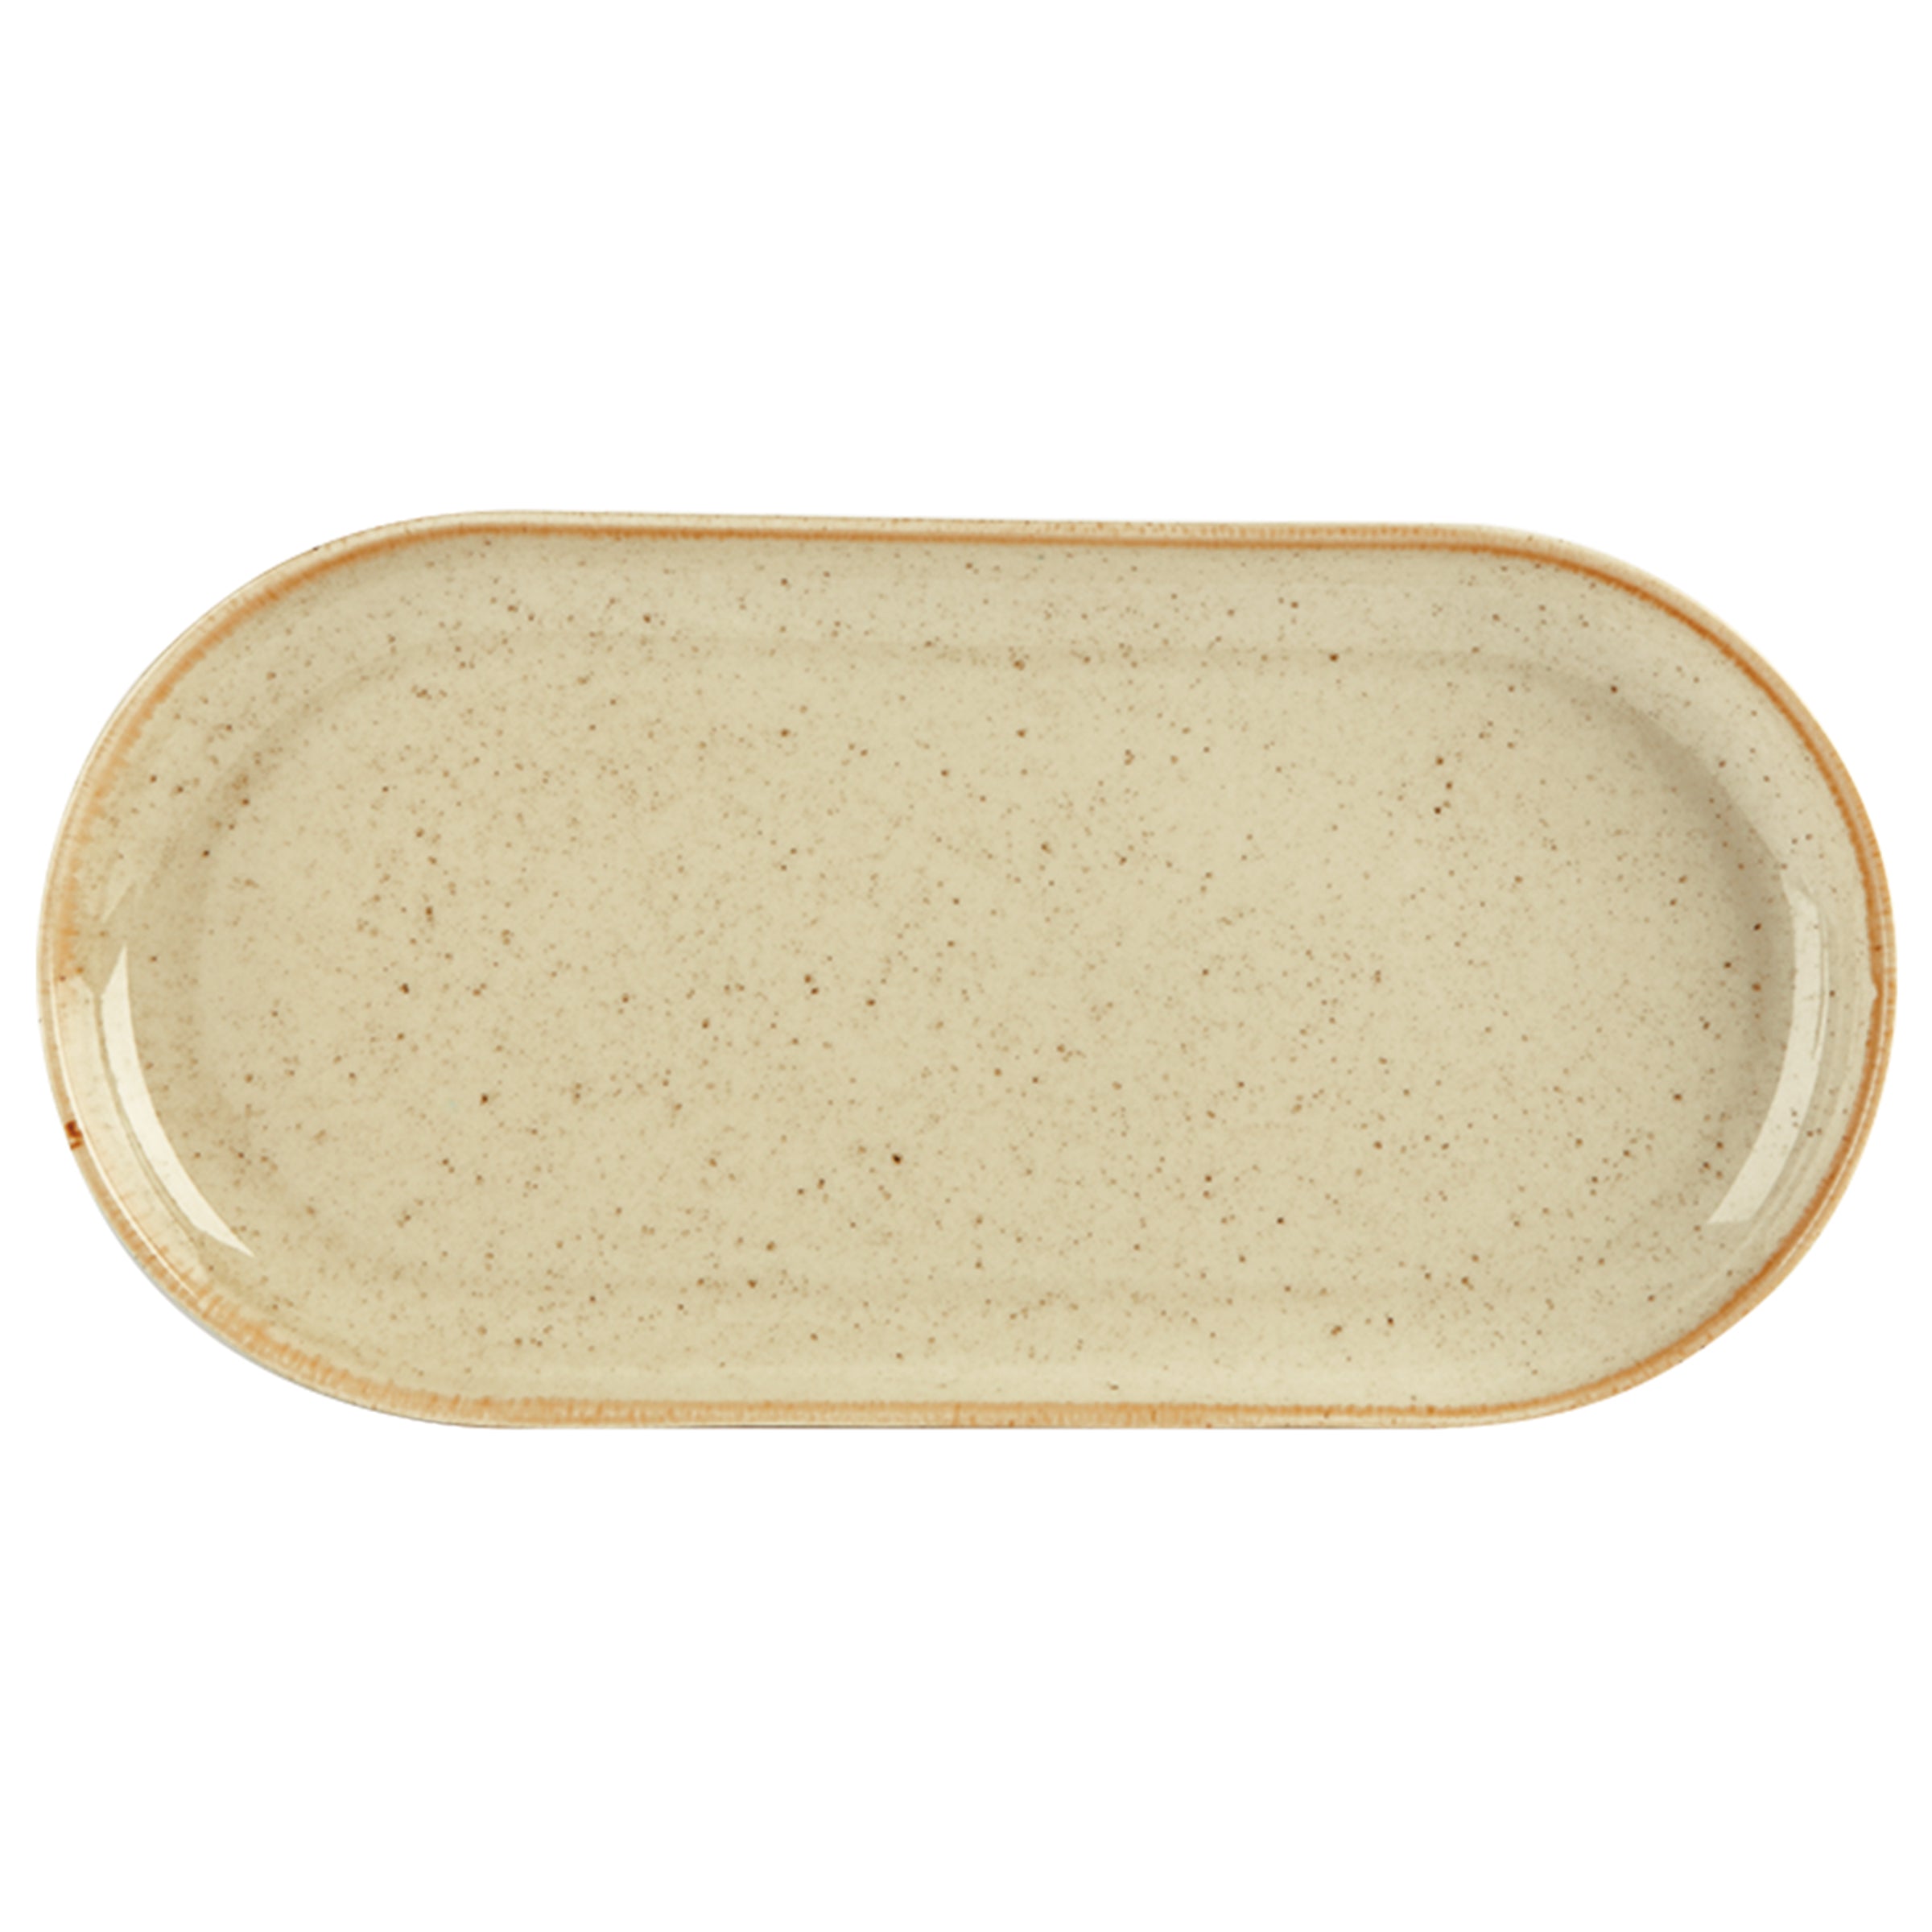 Seasons Wheat Narrow Oval Plate 32x20cm/12.5x8" 118132WH Pack Size  6